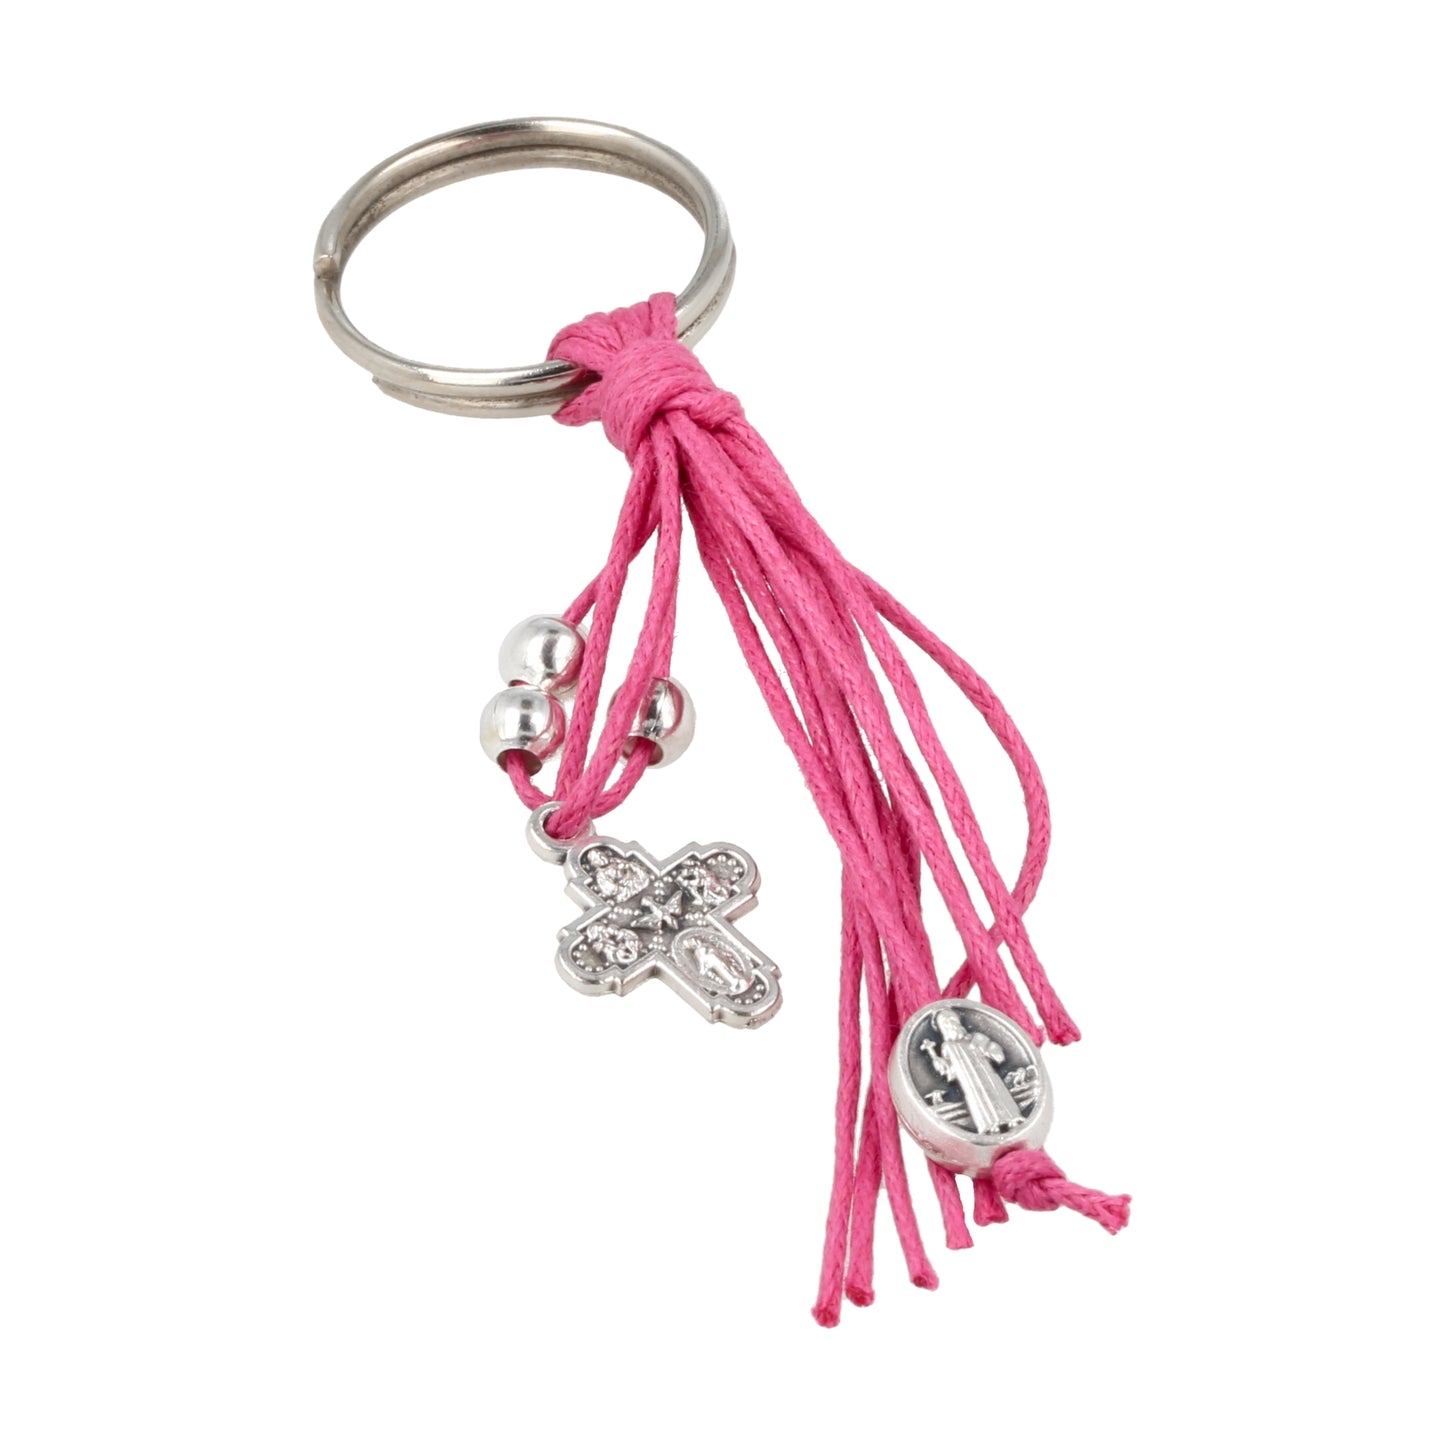 Keychain Rope Silver Metal Color Rose Cross. Souvenirs from Italy